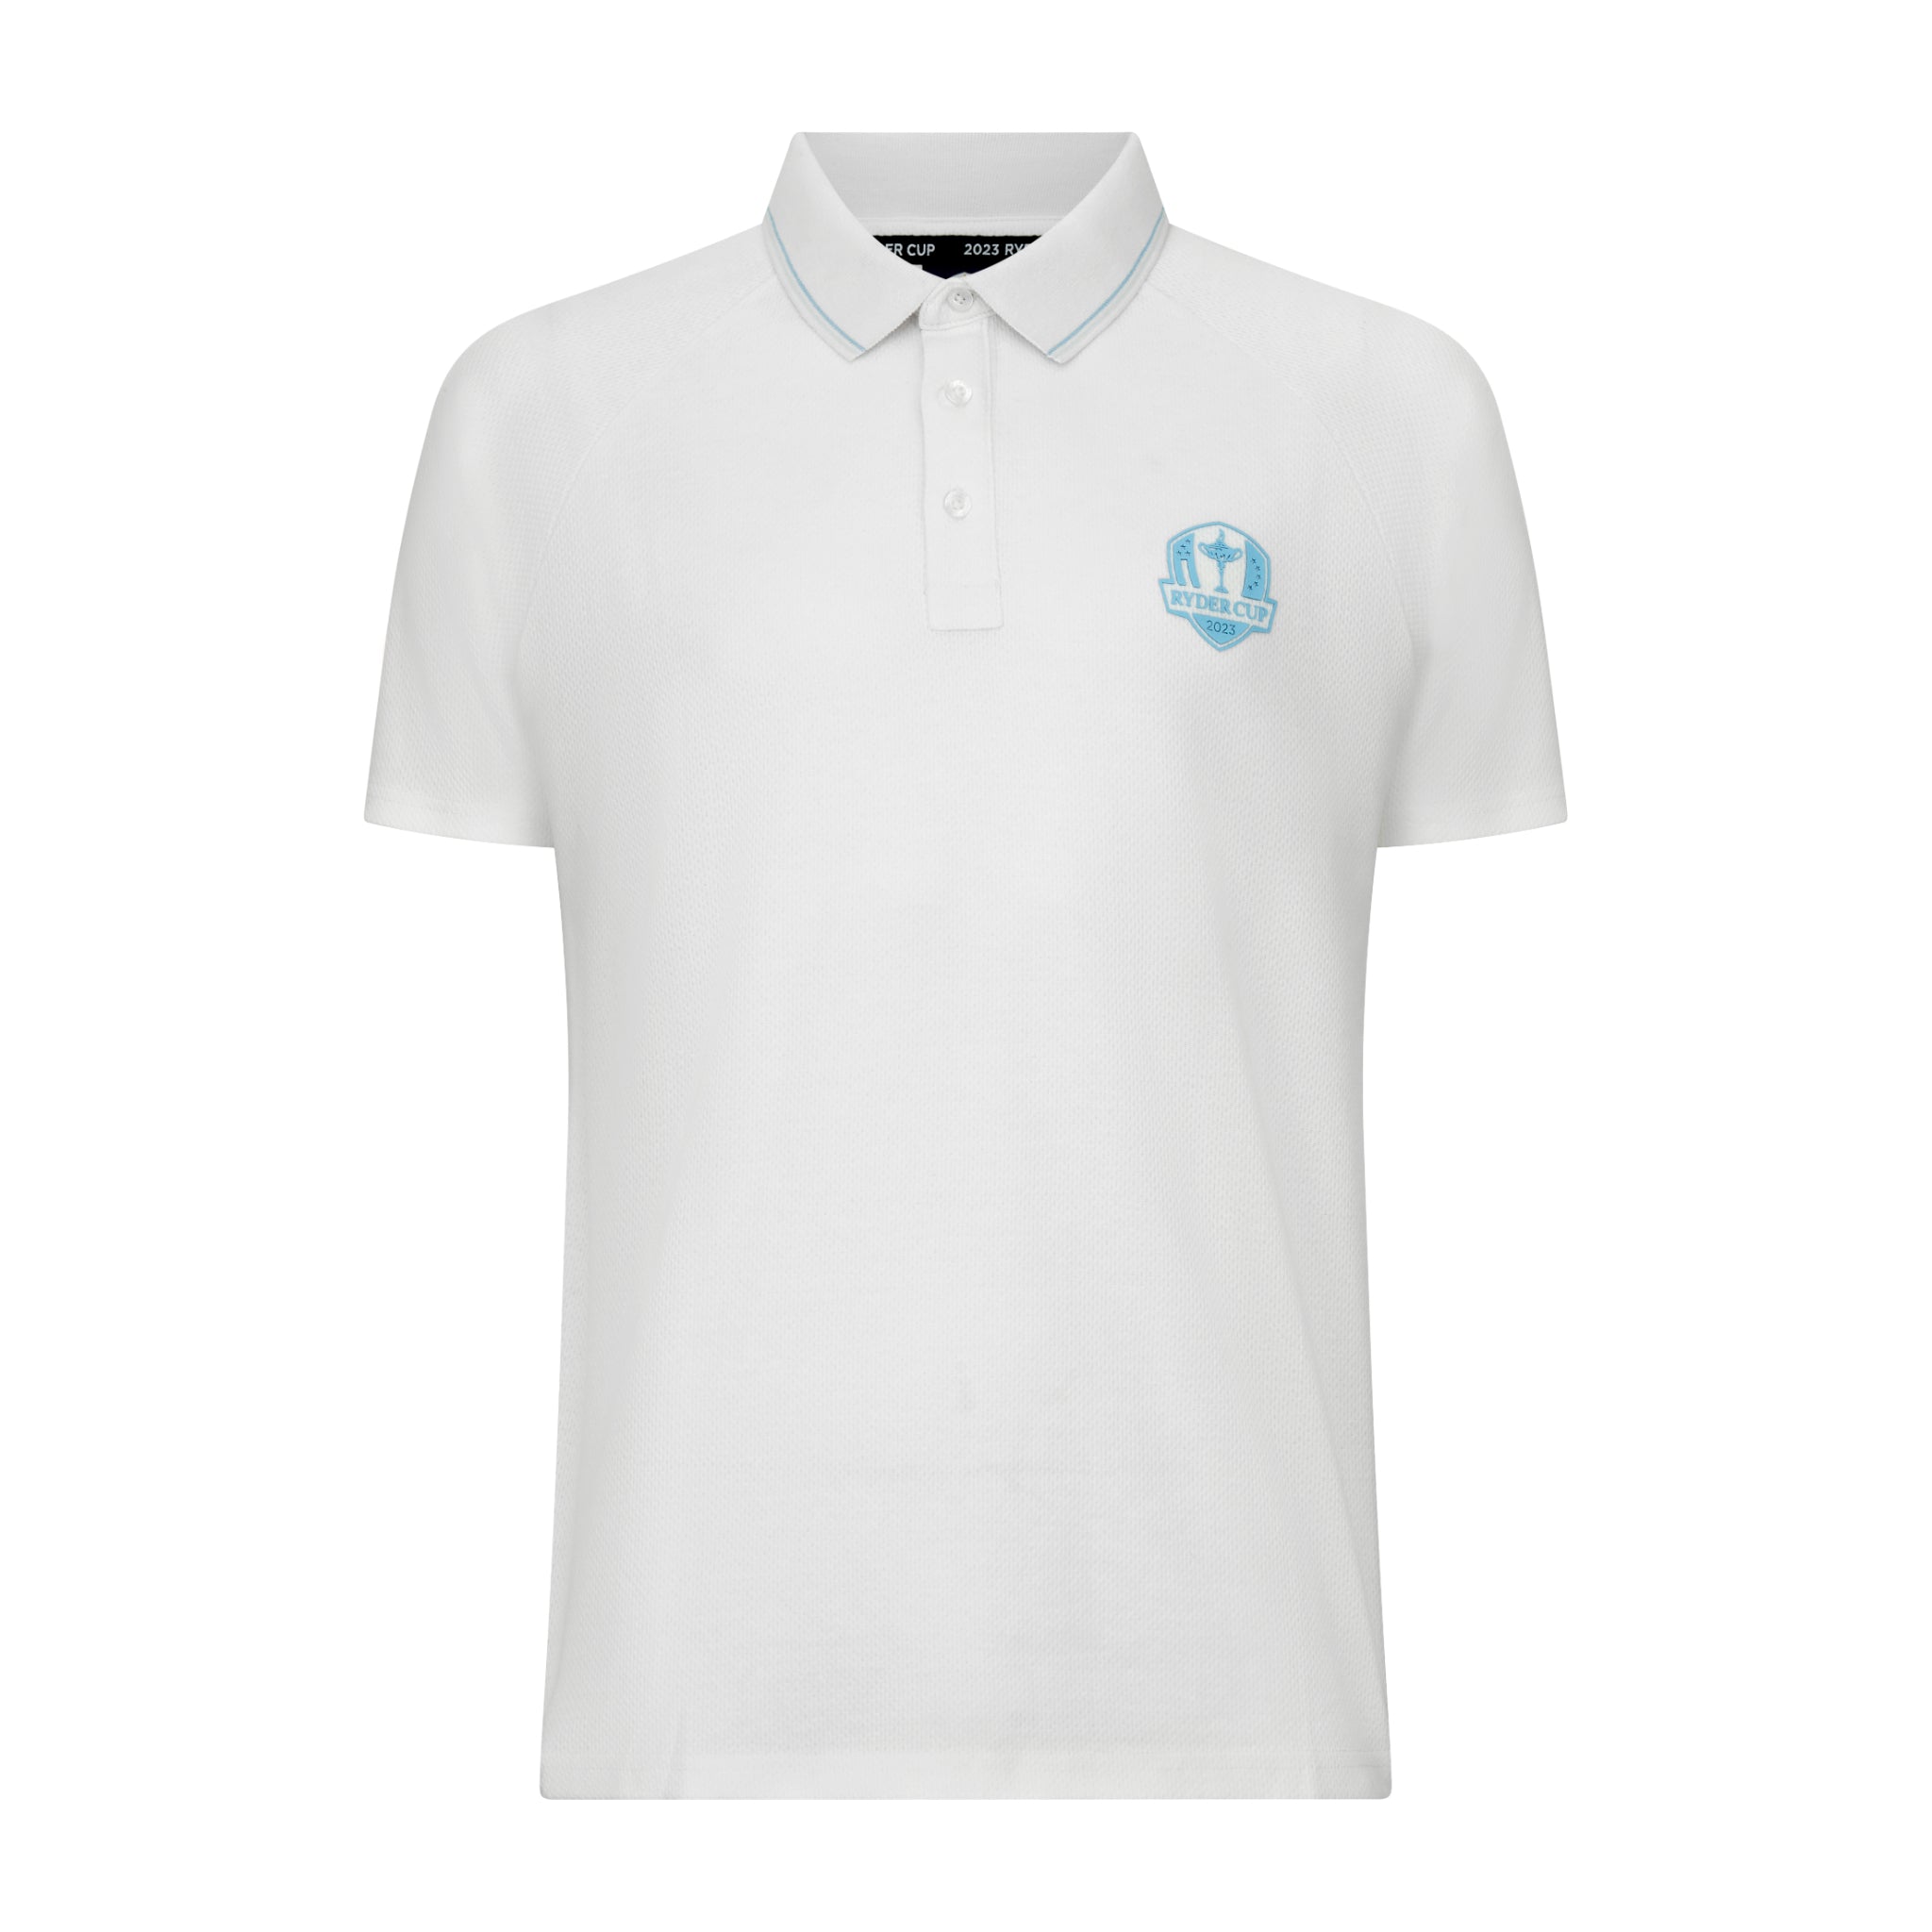 Men's Ryder Cup Clothing The Official European Ryder Cup Shop